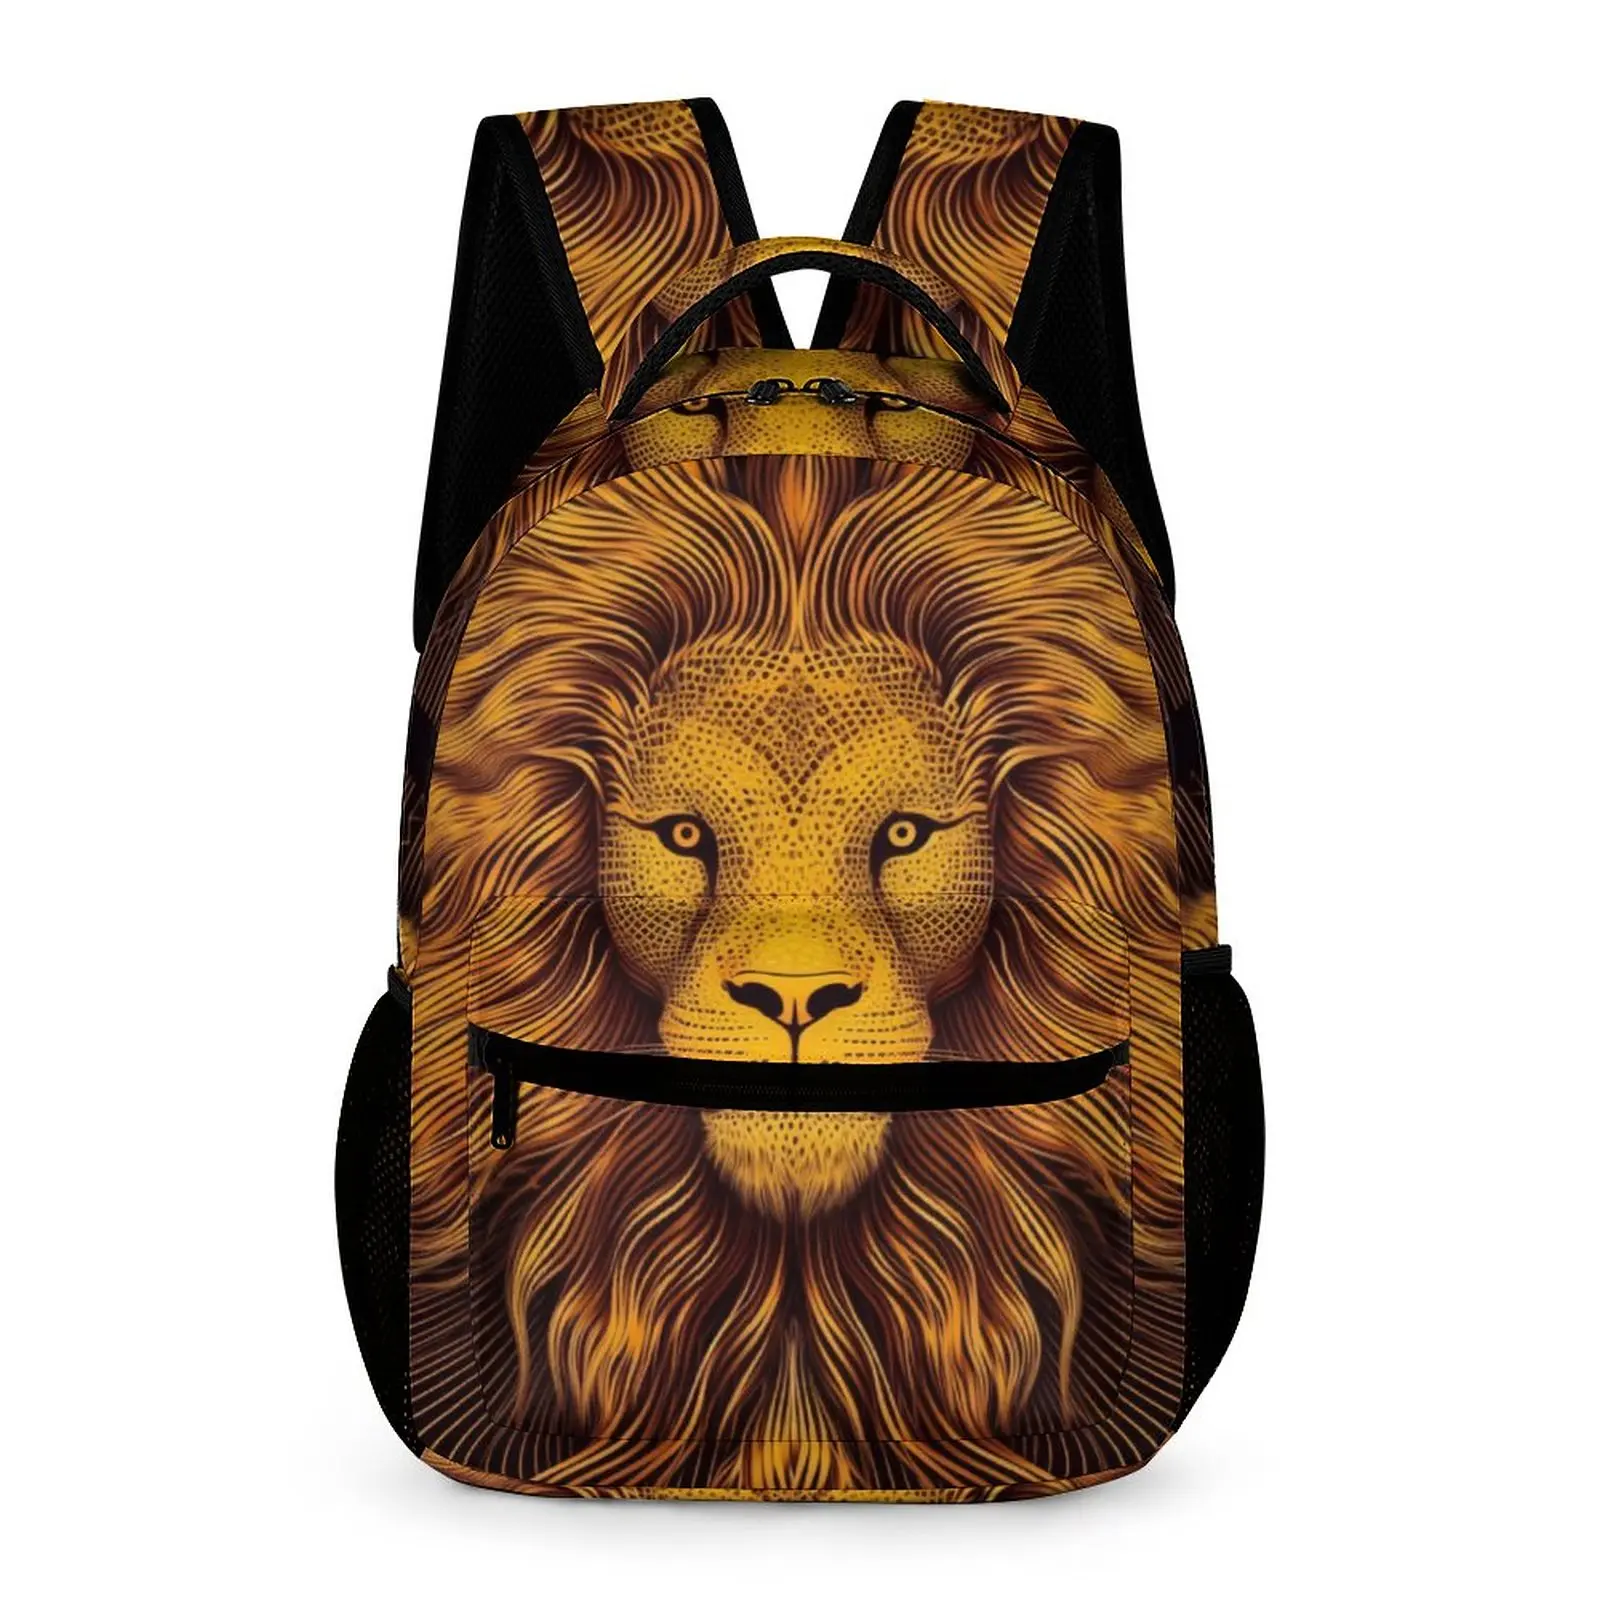 

Lion Backpack Portraits Psychedelic Lines Travel Backpacks Women High Quality Big High School Bags Fun Rucksack